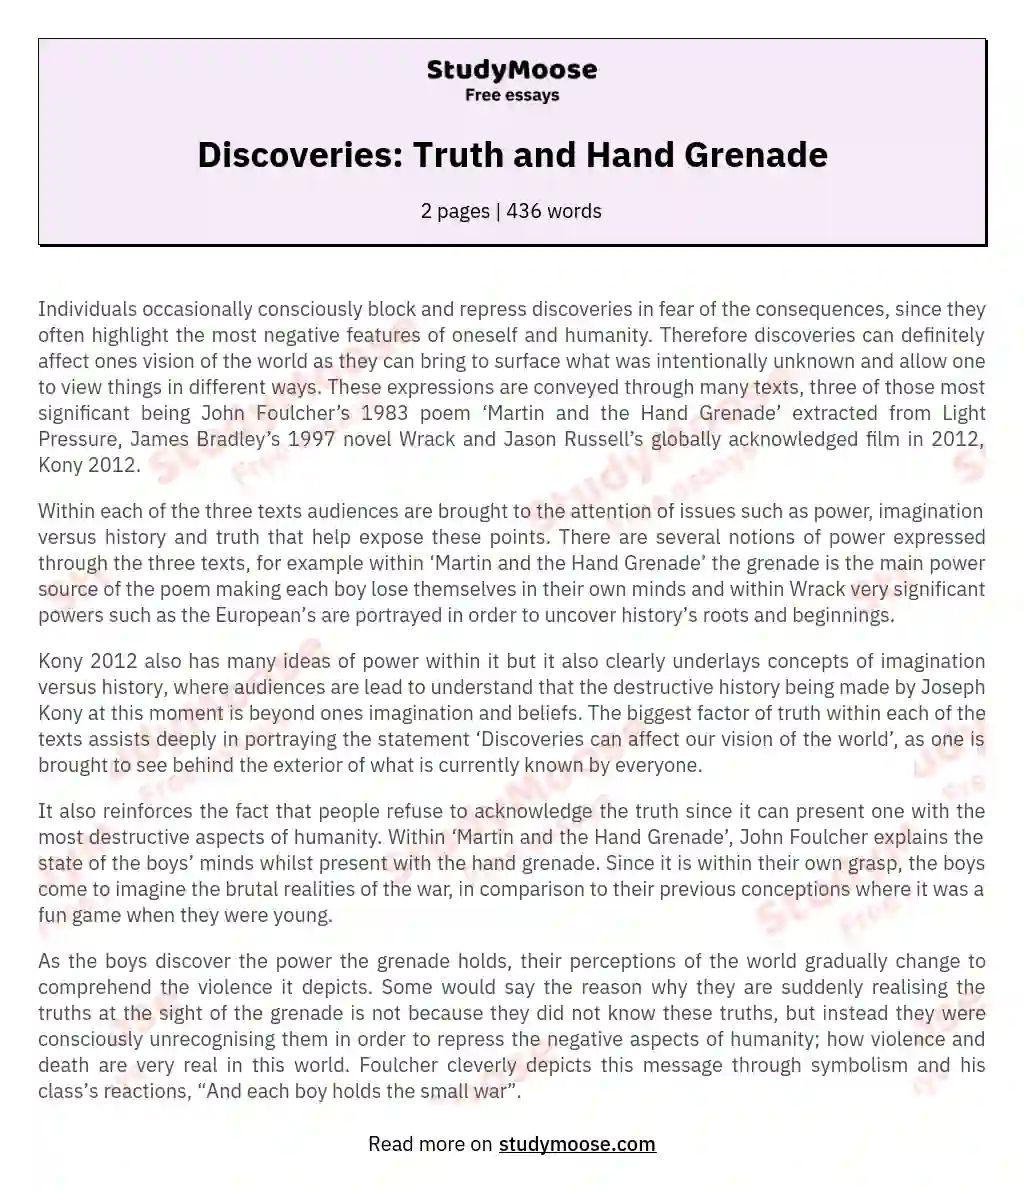 Discoveries: Truth and Hand Grenade essay